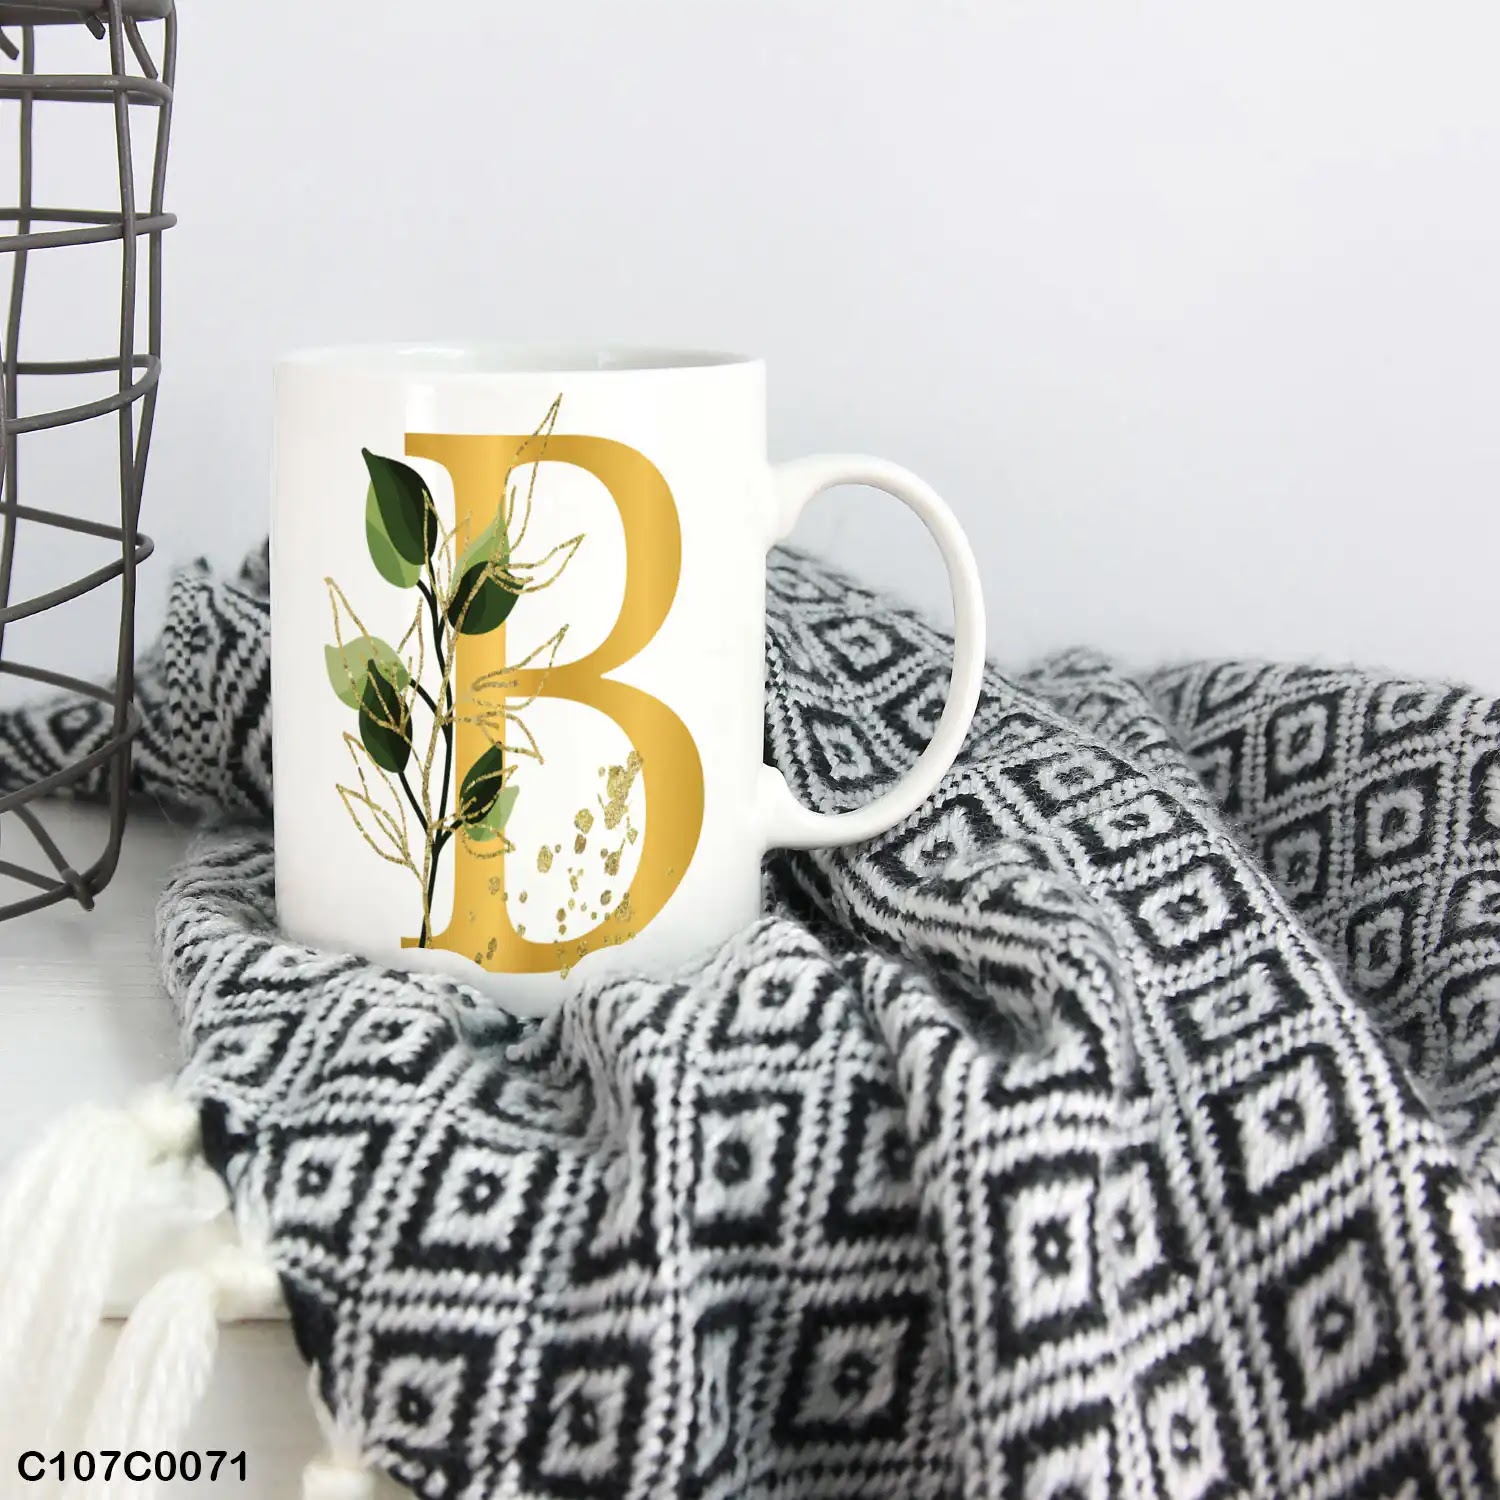 A white mug (cup) printed with gold Letter "B" and small green branch